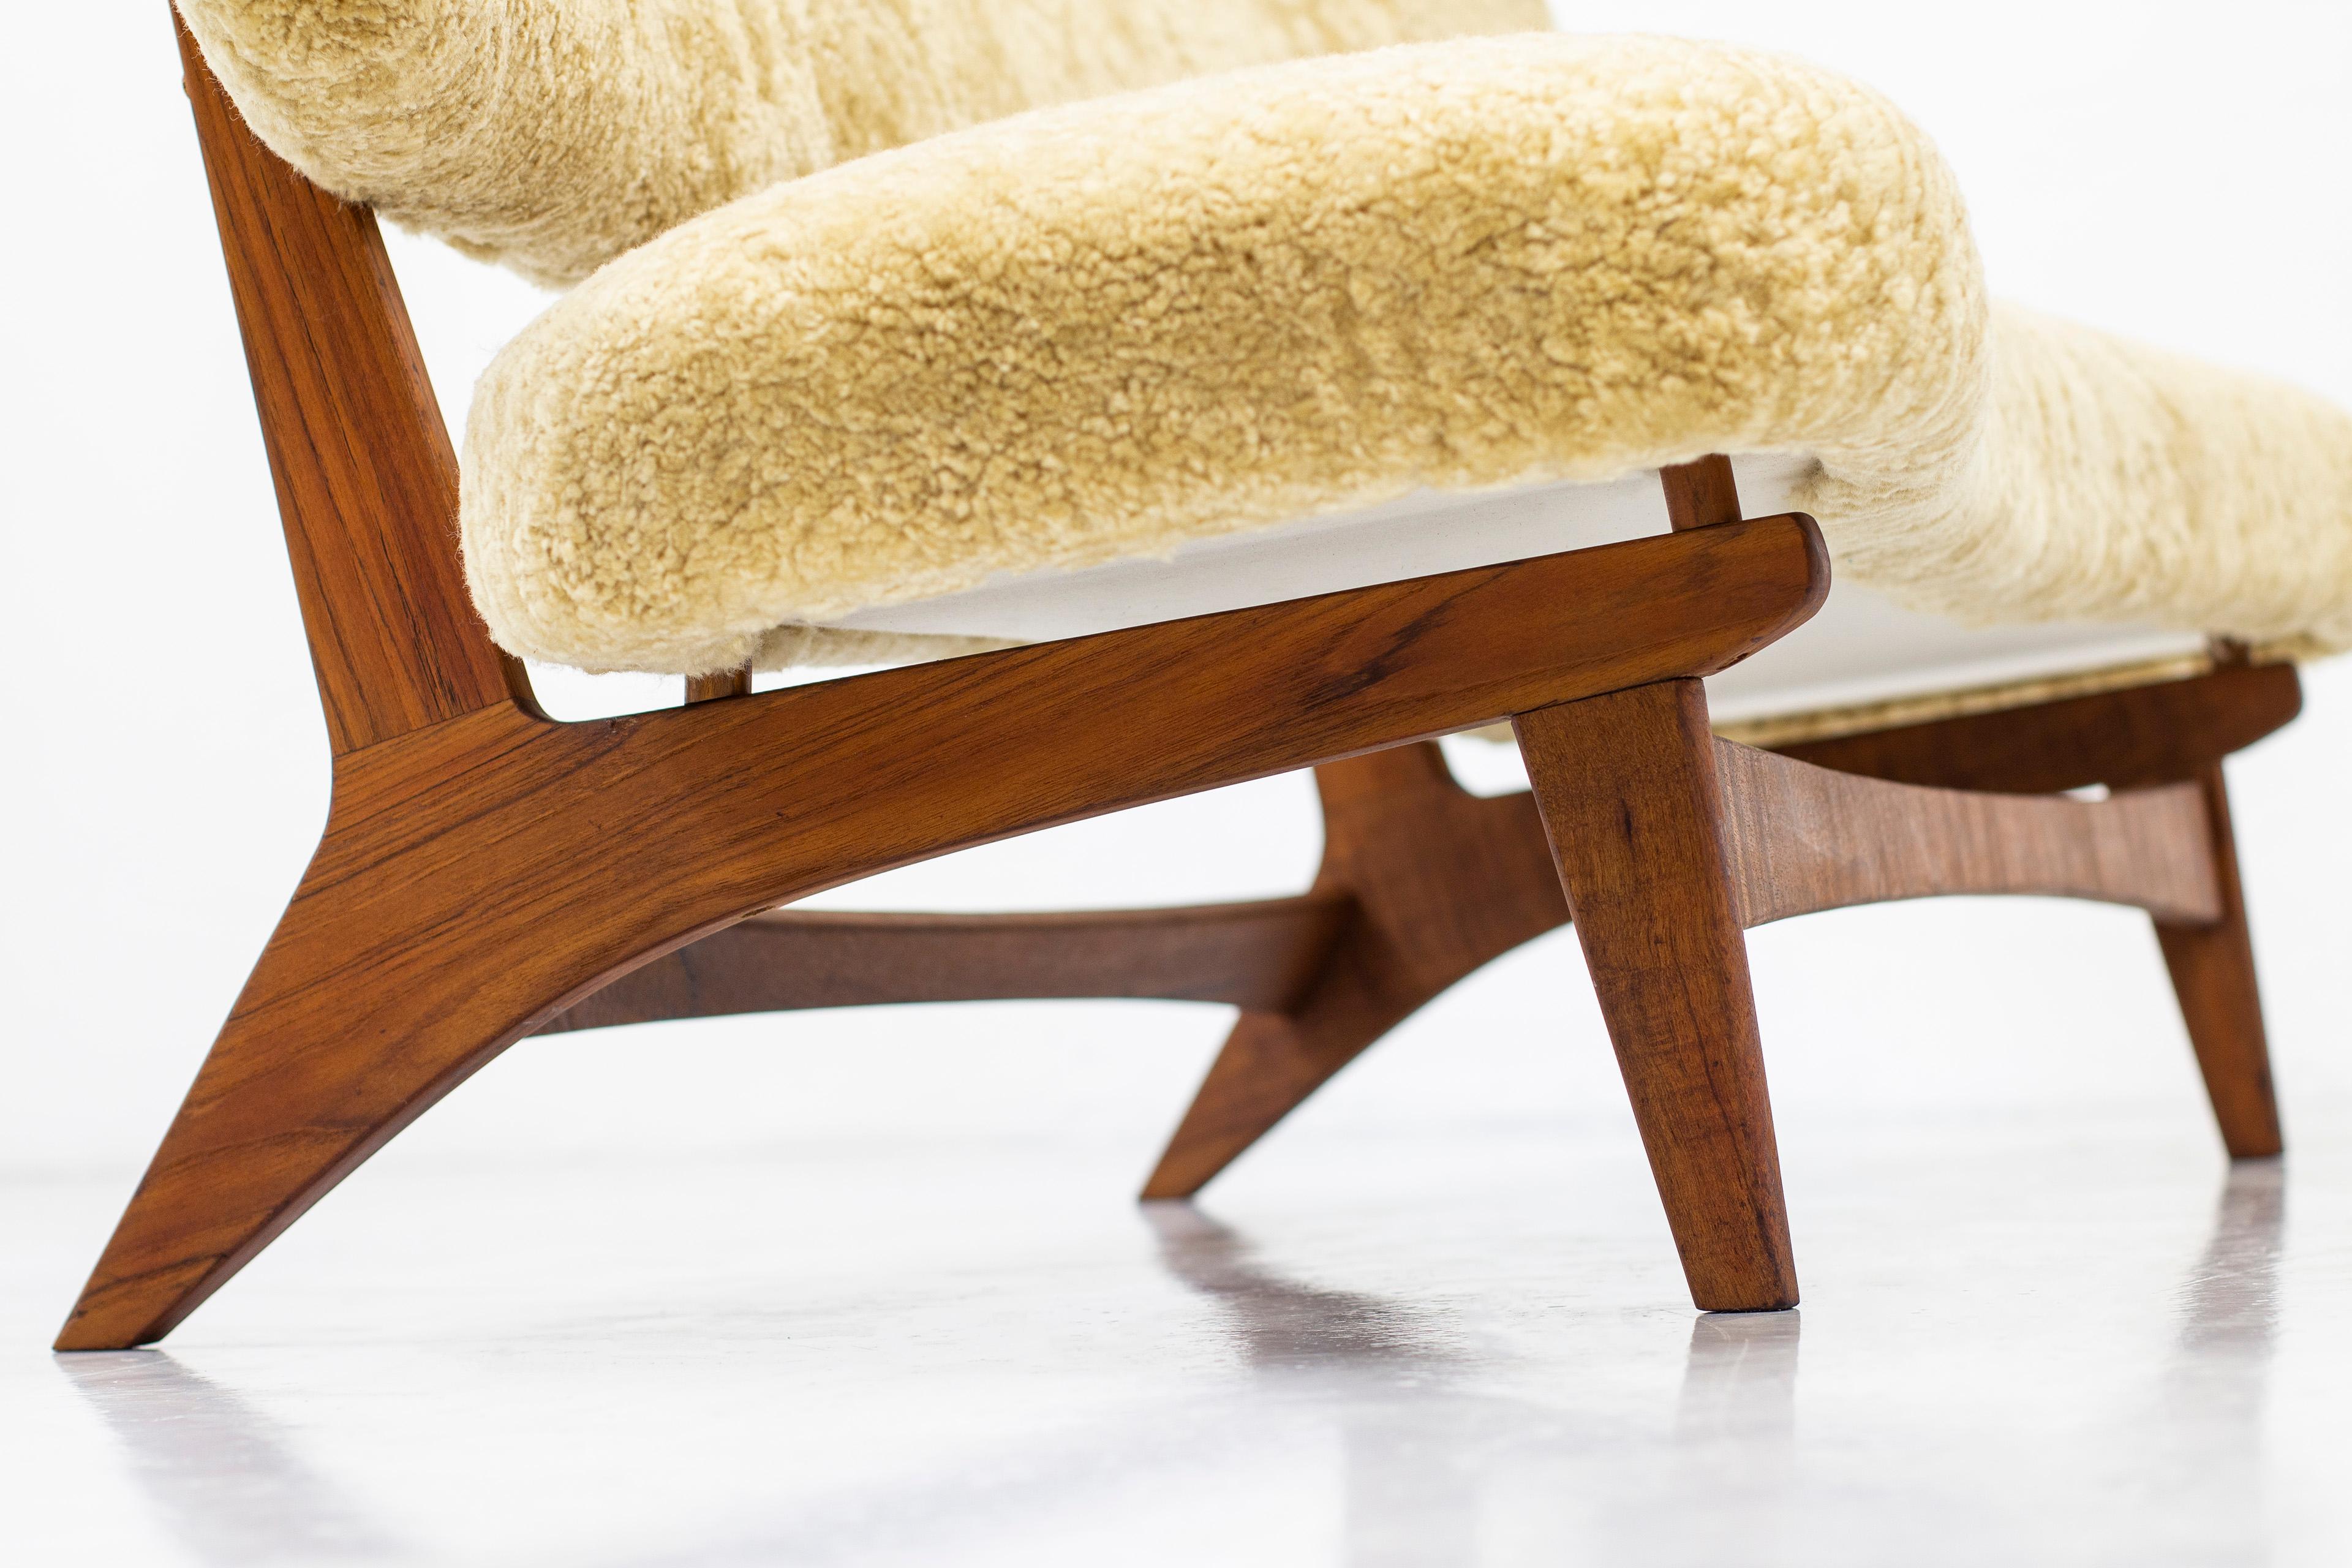 Sheepskin Rare Sofa in Sheep Skin by Sigurd Resell for Rastad & Relling, Norway, 1950s